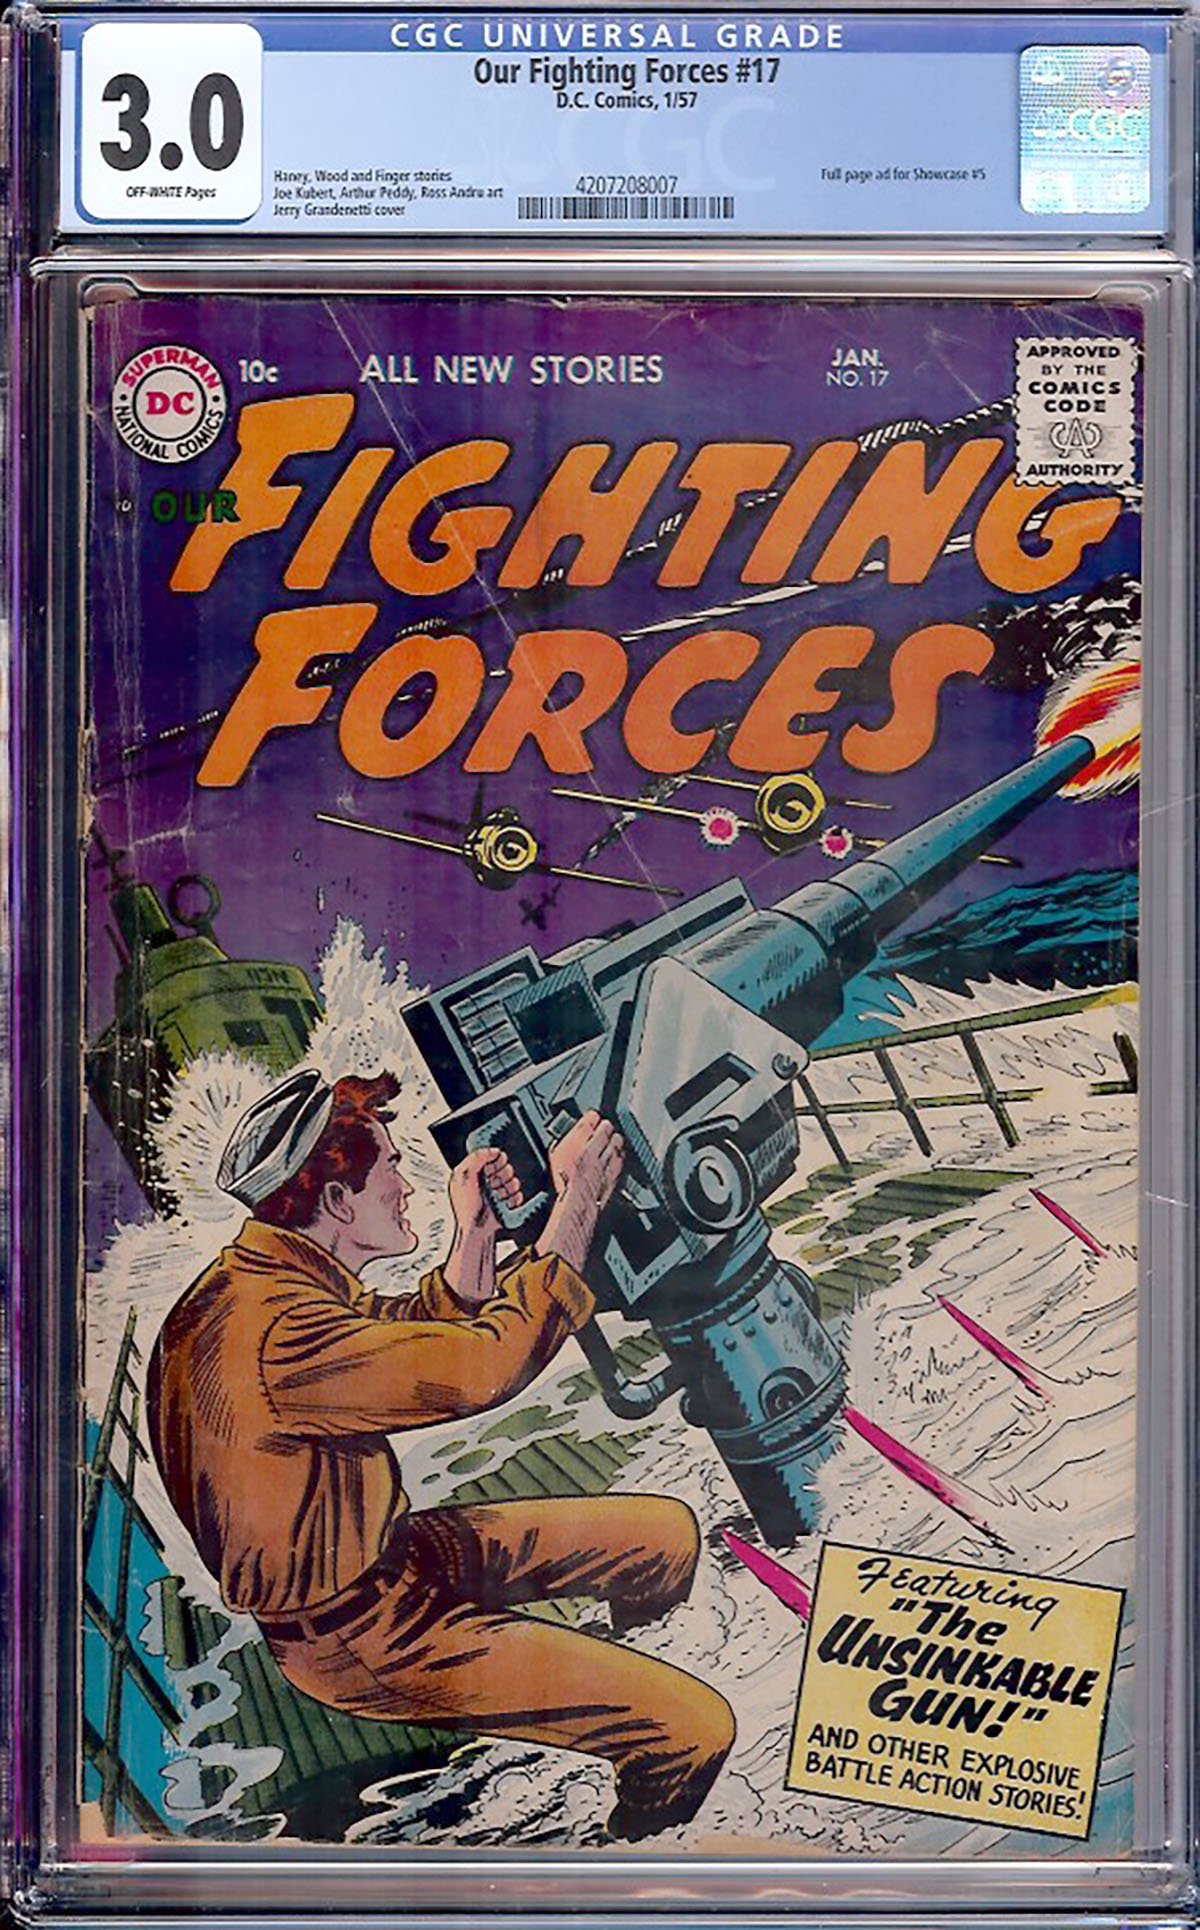 Our Fighting Forces #17 CGC 3.0 ow